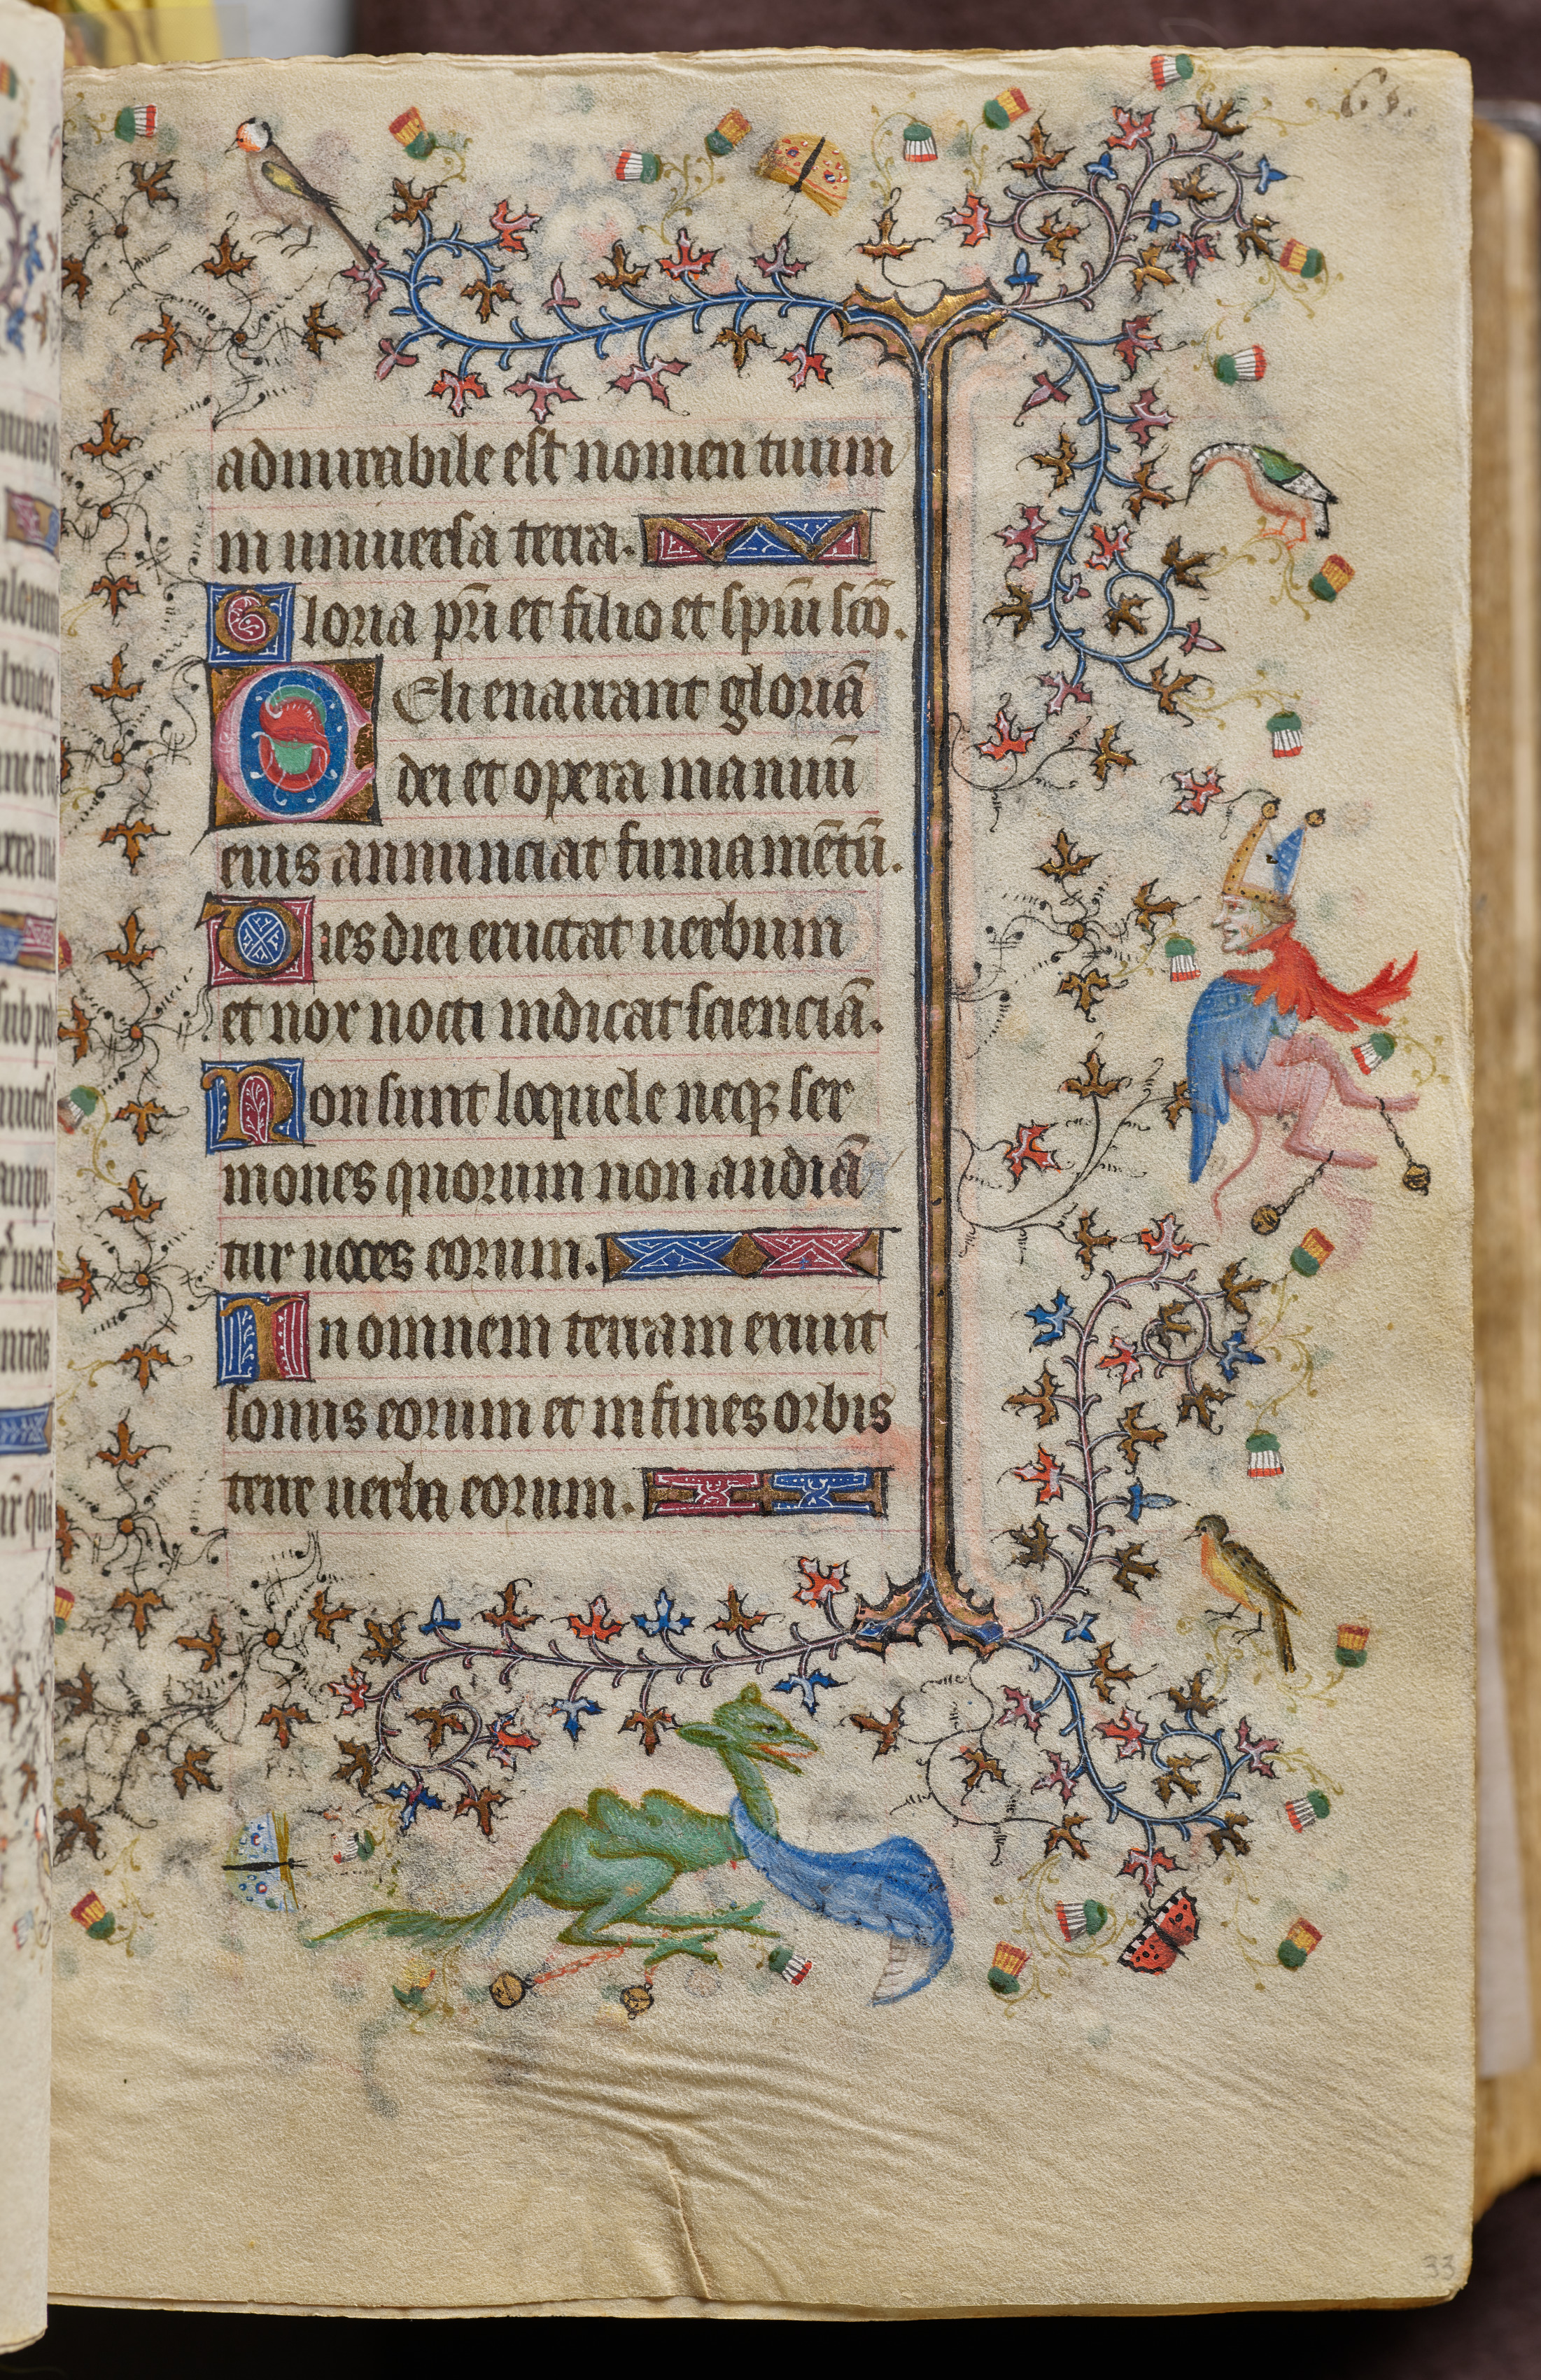 Hours of Charles the Noble, King of Navarre (1361-1425): fol. 33r, Text